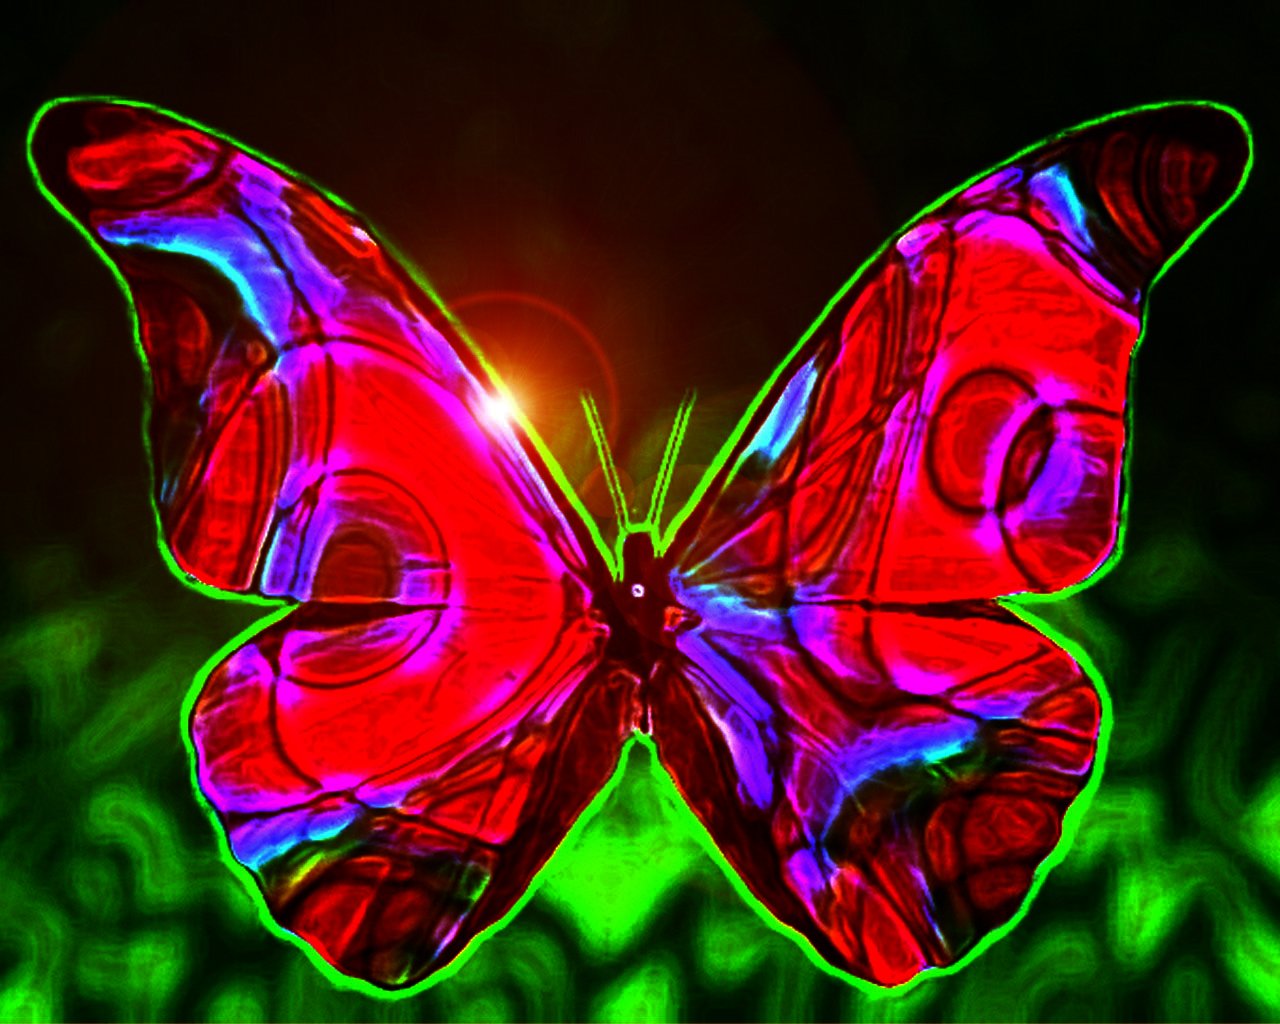  Designs Butterfly Background Wallpapers on this Butterfly Background